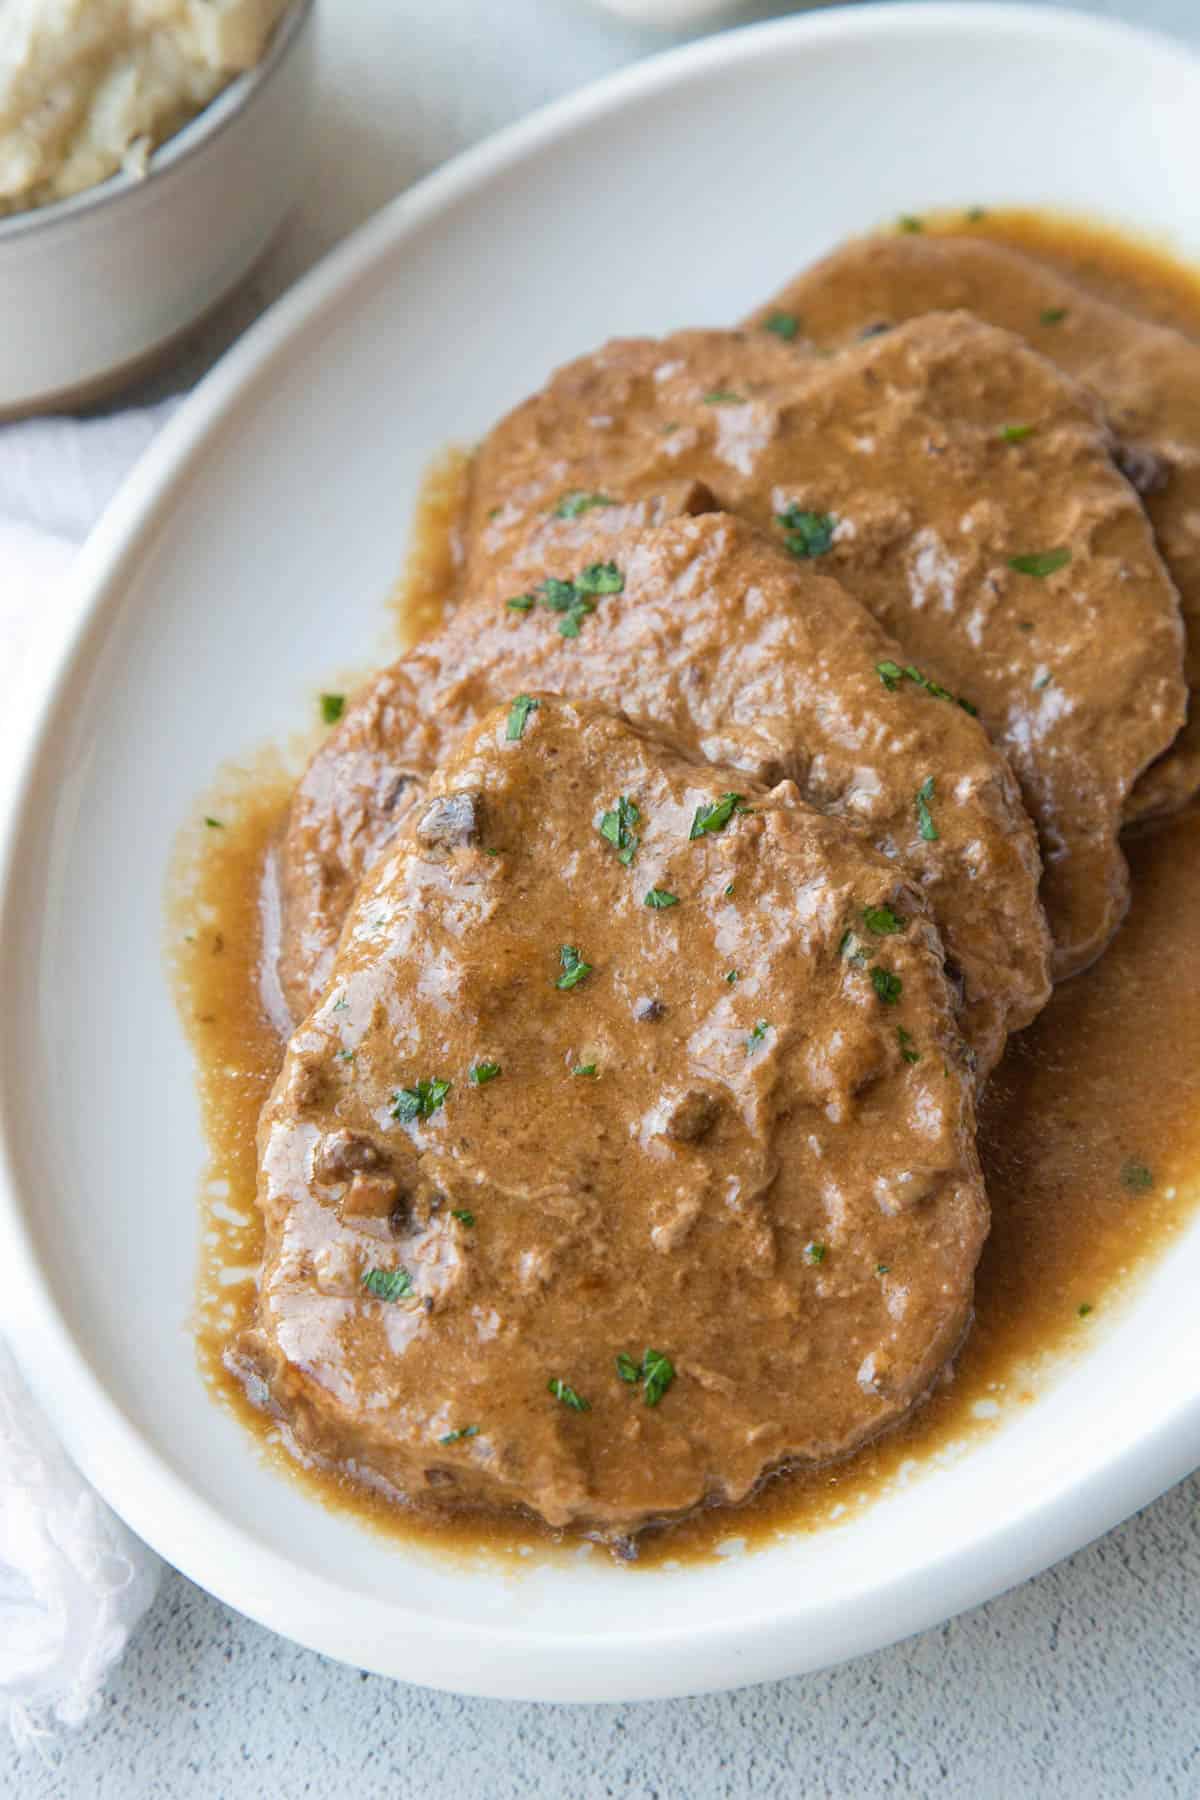 3 Ingredient Crock Pot Steak and Gravy - Cuts and Crumbles